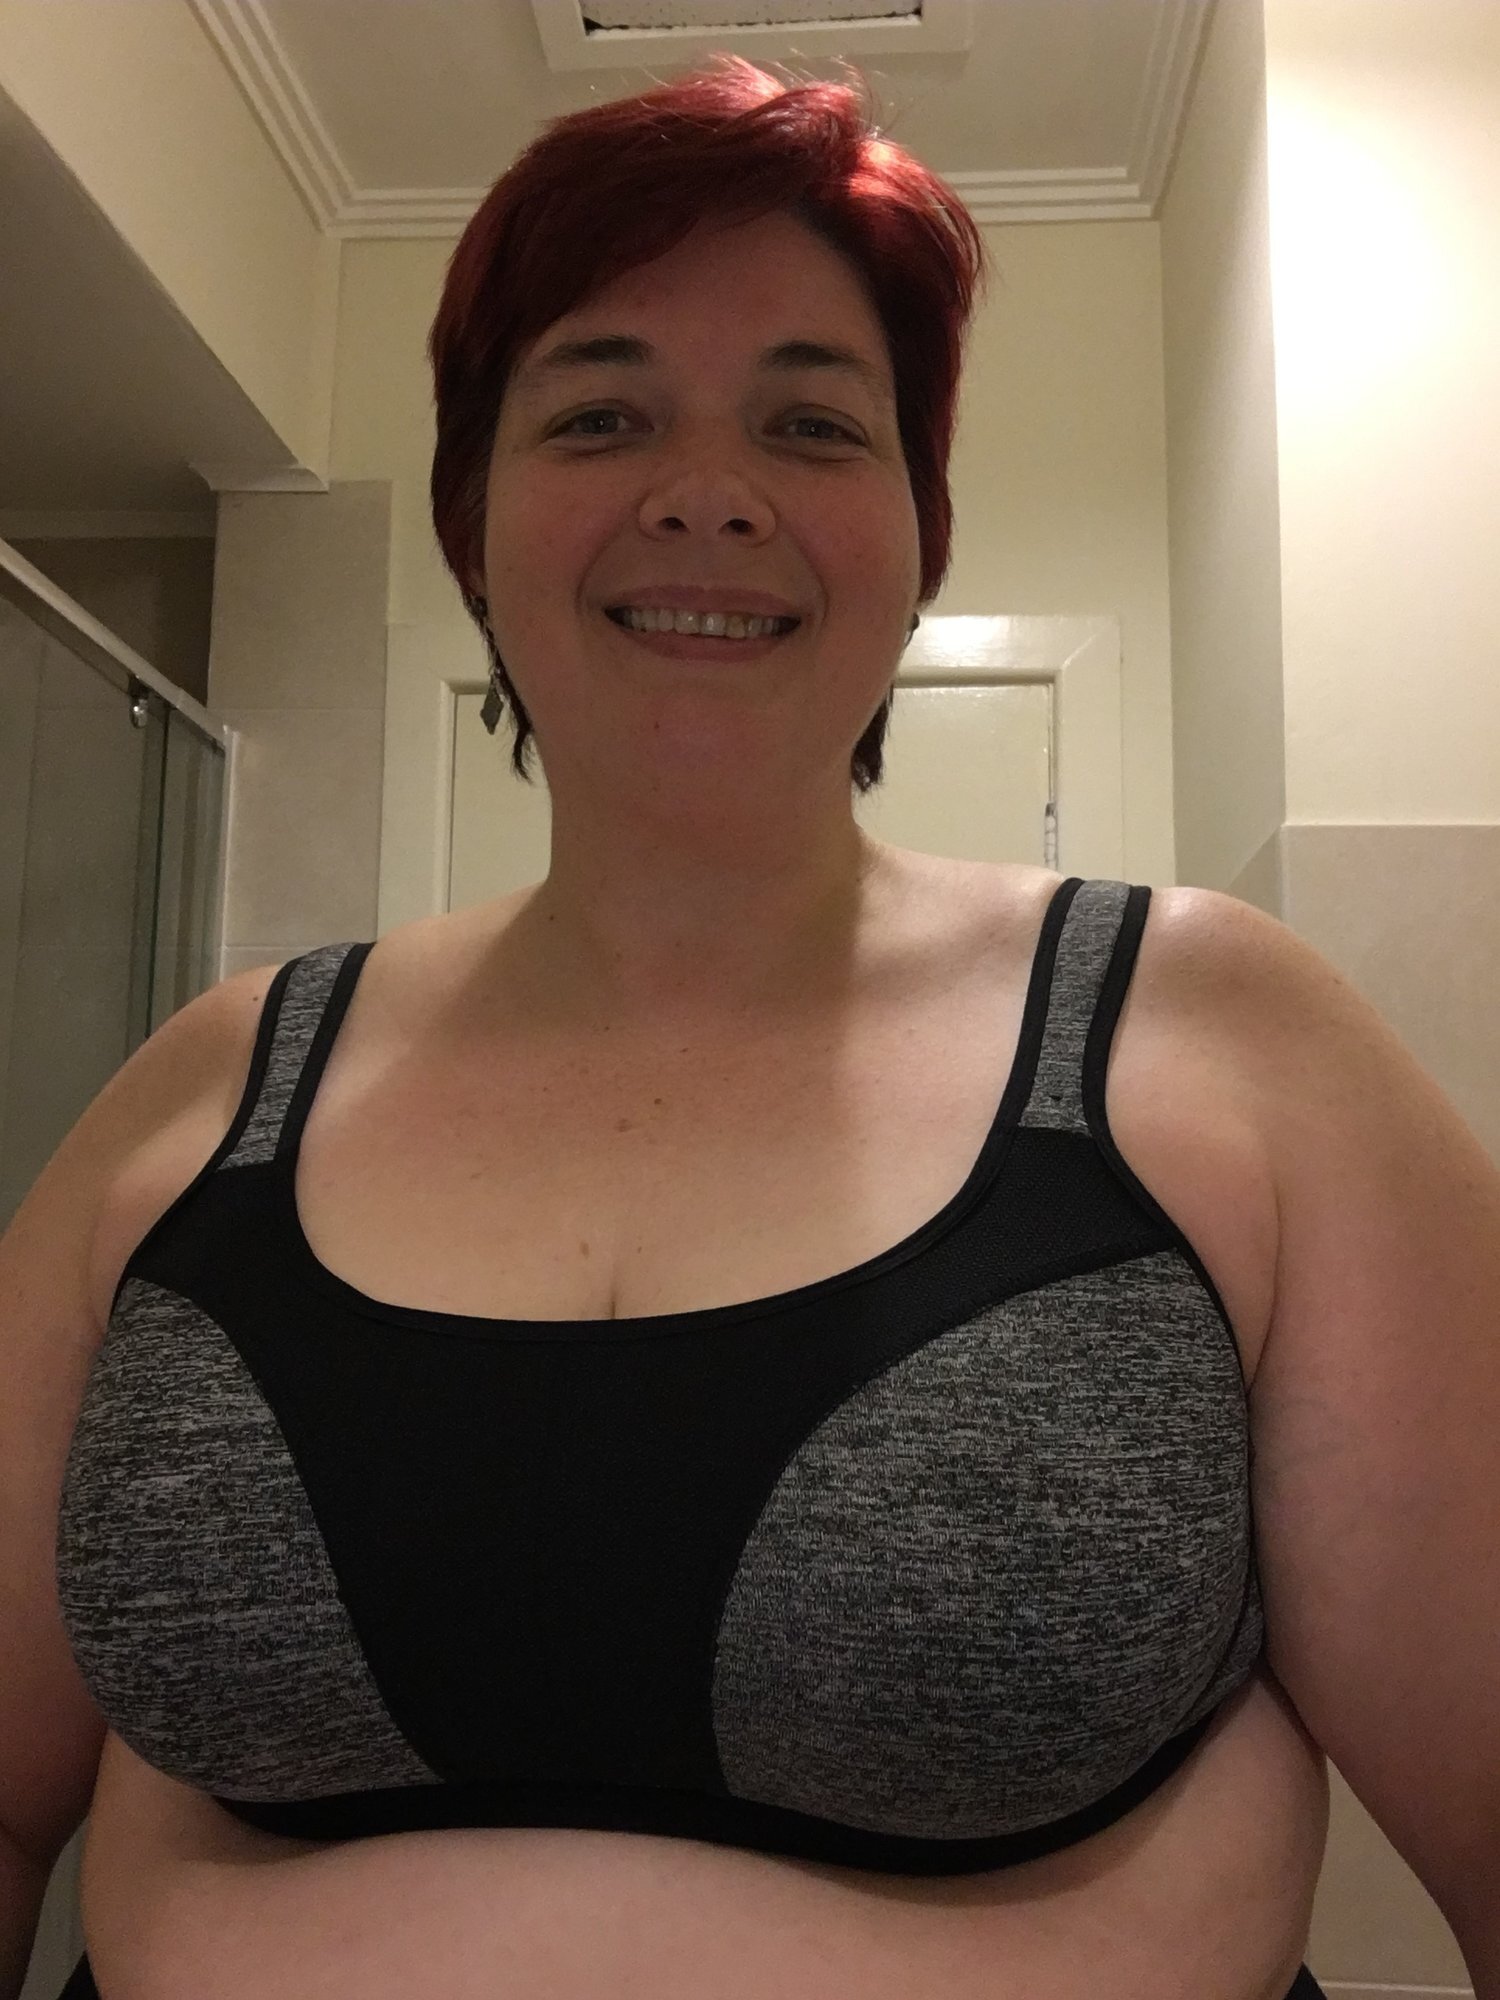 The North Face High Impact Sports Bra Review